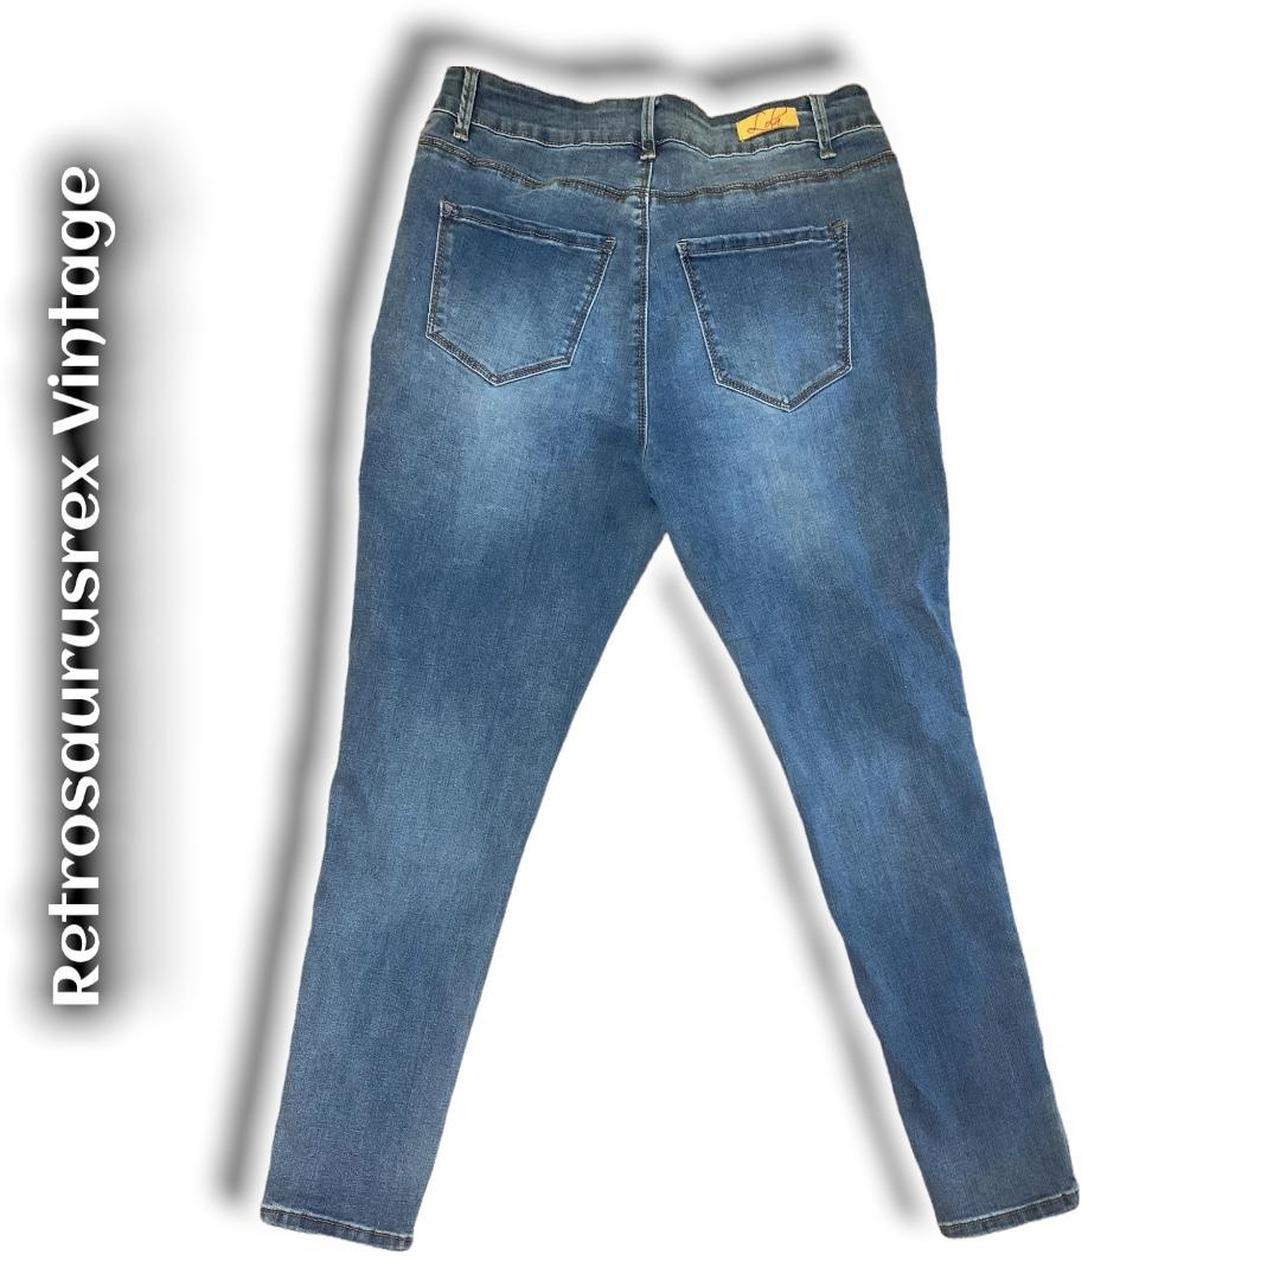 Product Image 4 - #Lola Jeans #Blair RB #MidRise